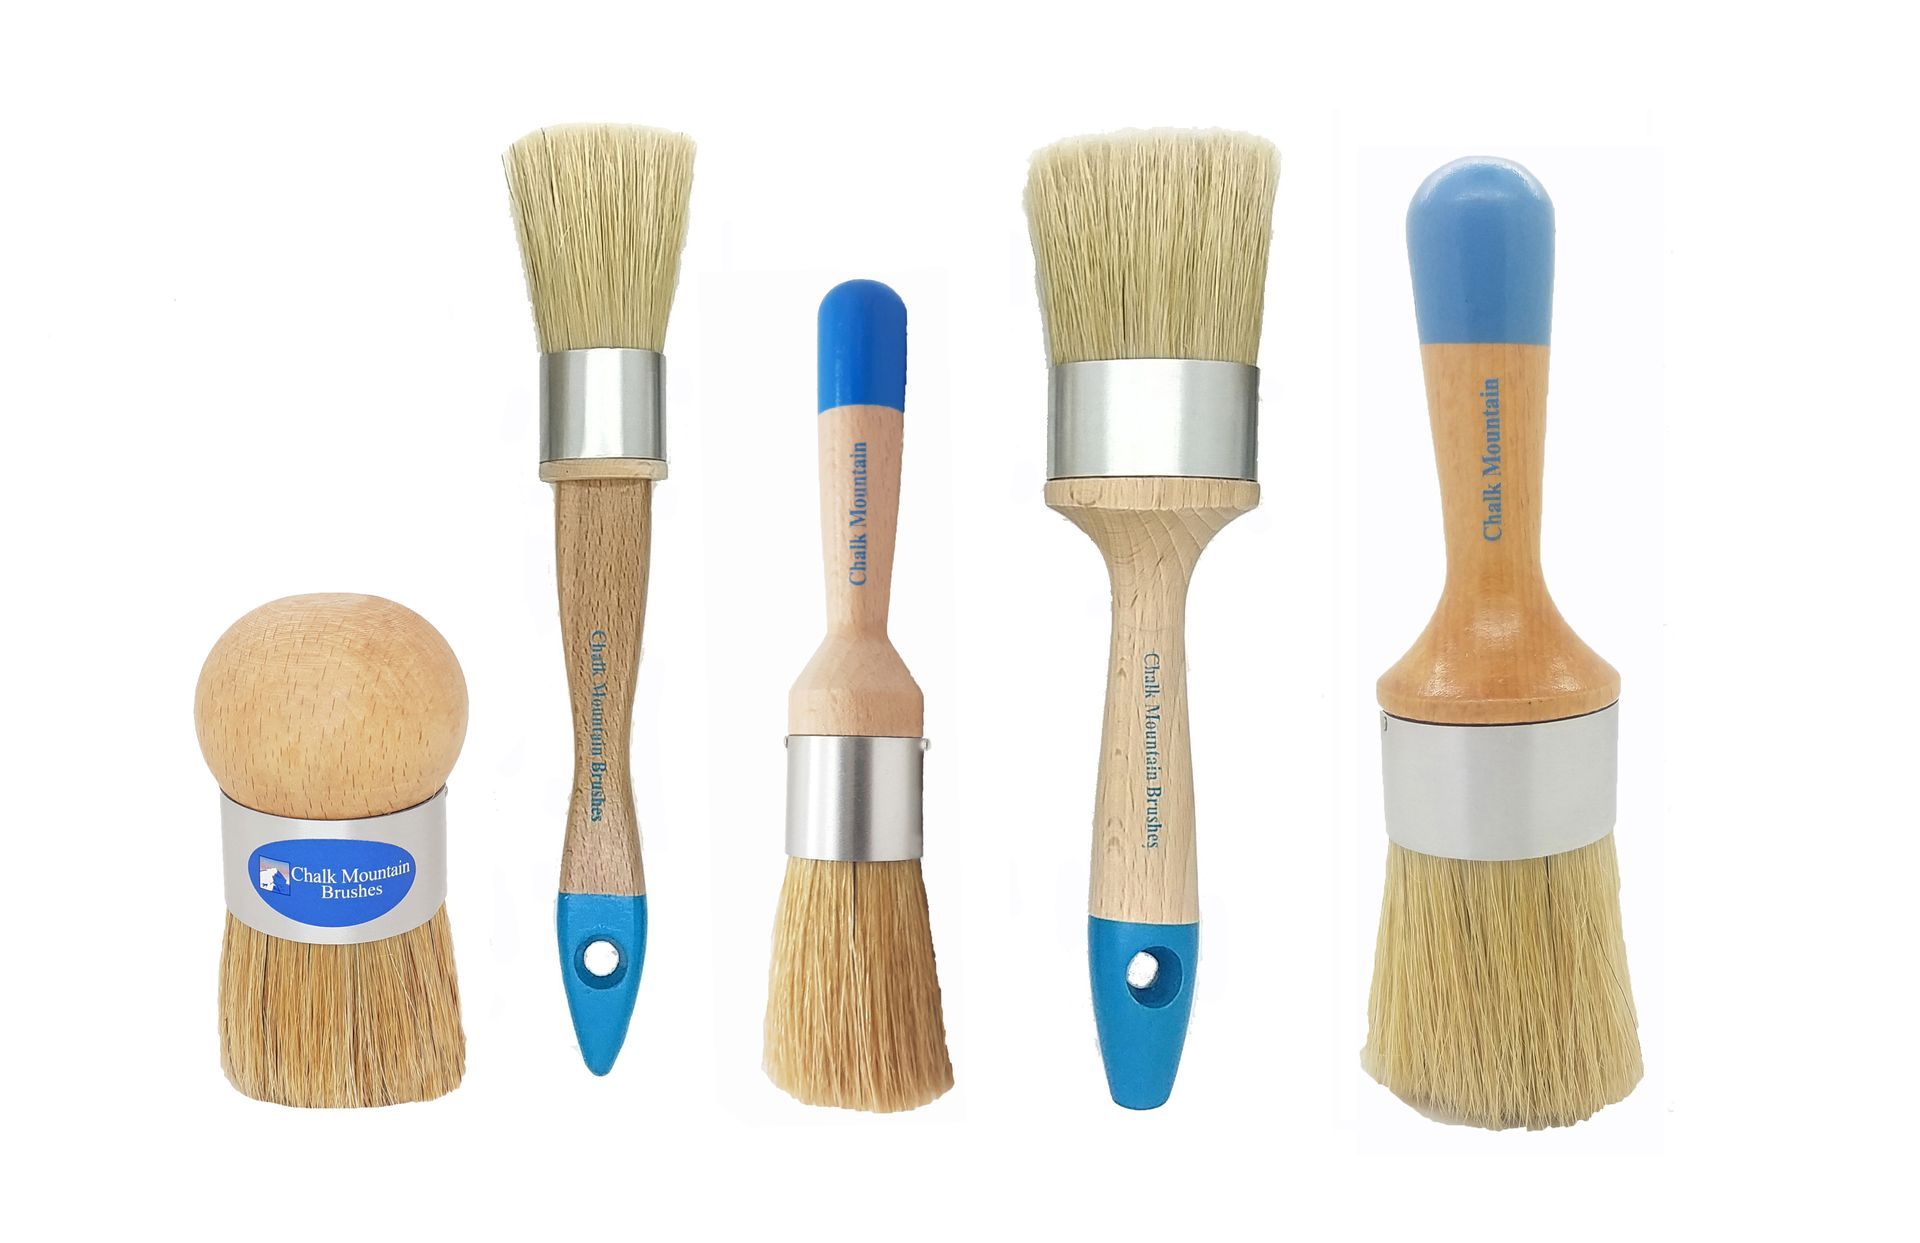 Artisan's Choice for Quality and Efficient Paint & Wax Brushes